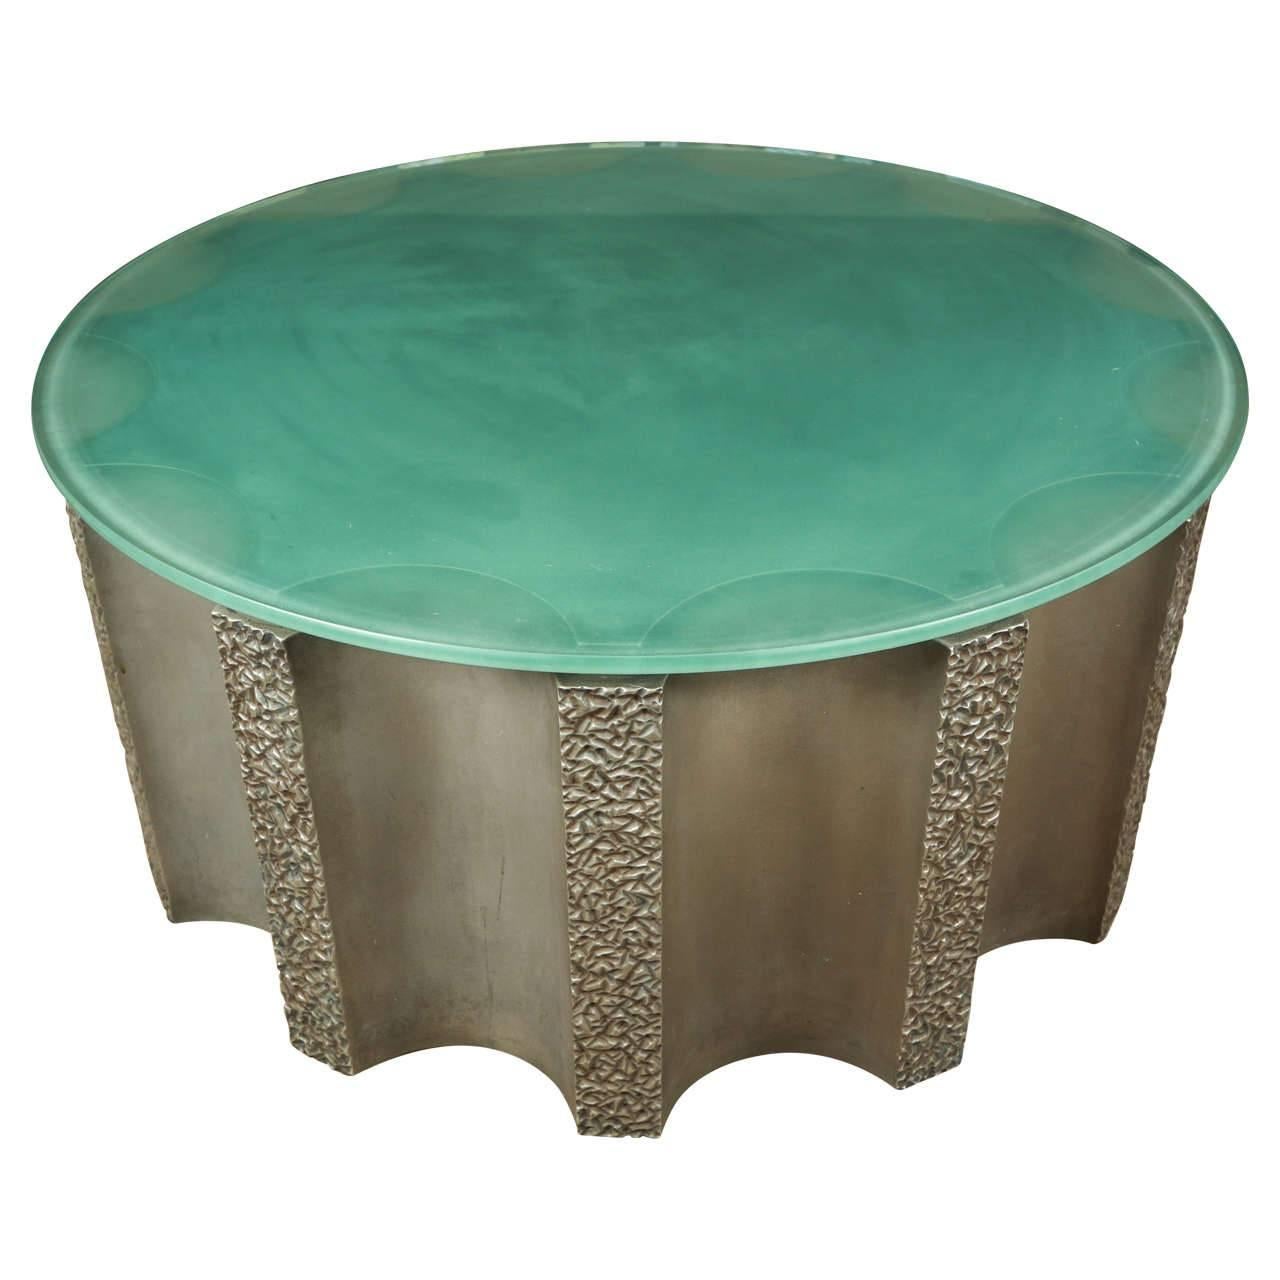 Impressive Drum-Shaped Fluted Coffee Table by Steve Chase